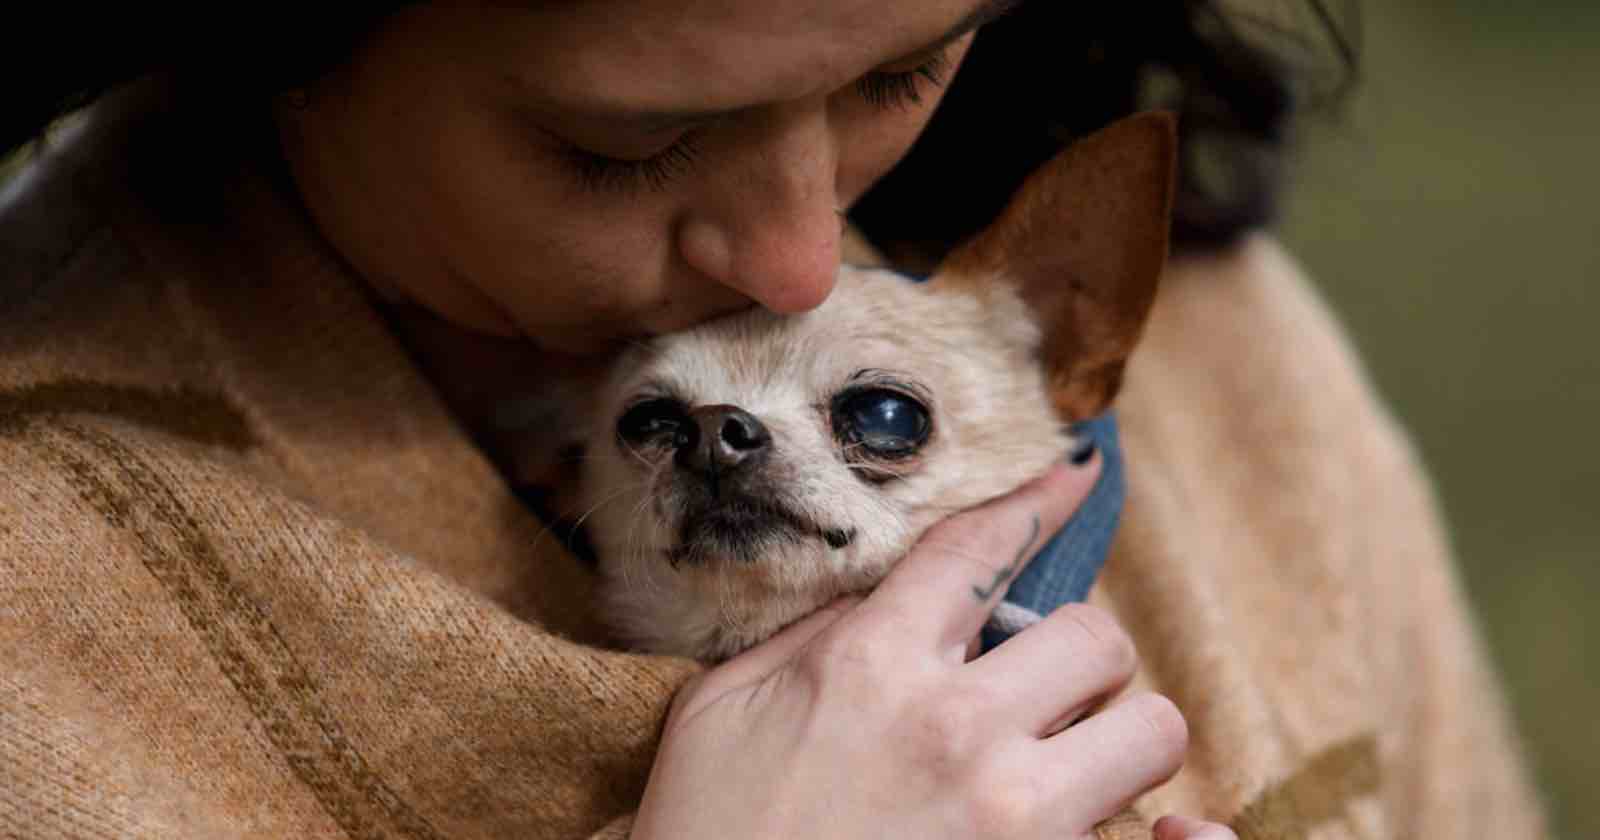 Moving Photos Capture People's Final Moments with Their Pets